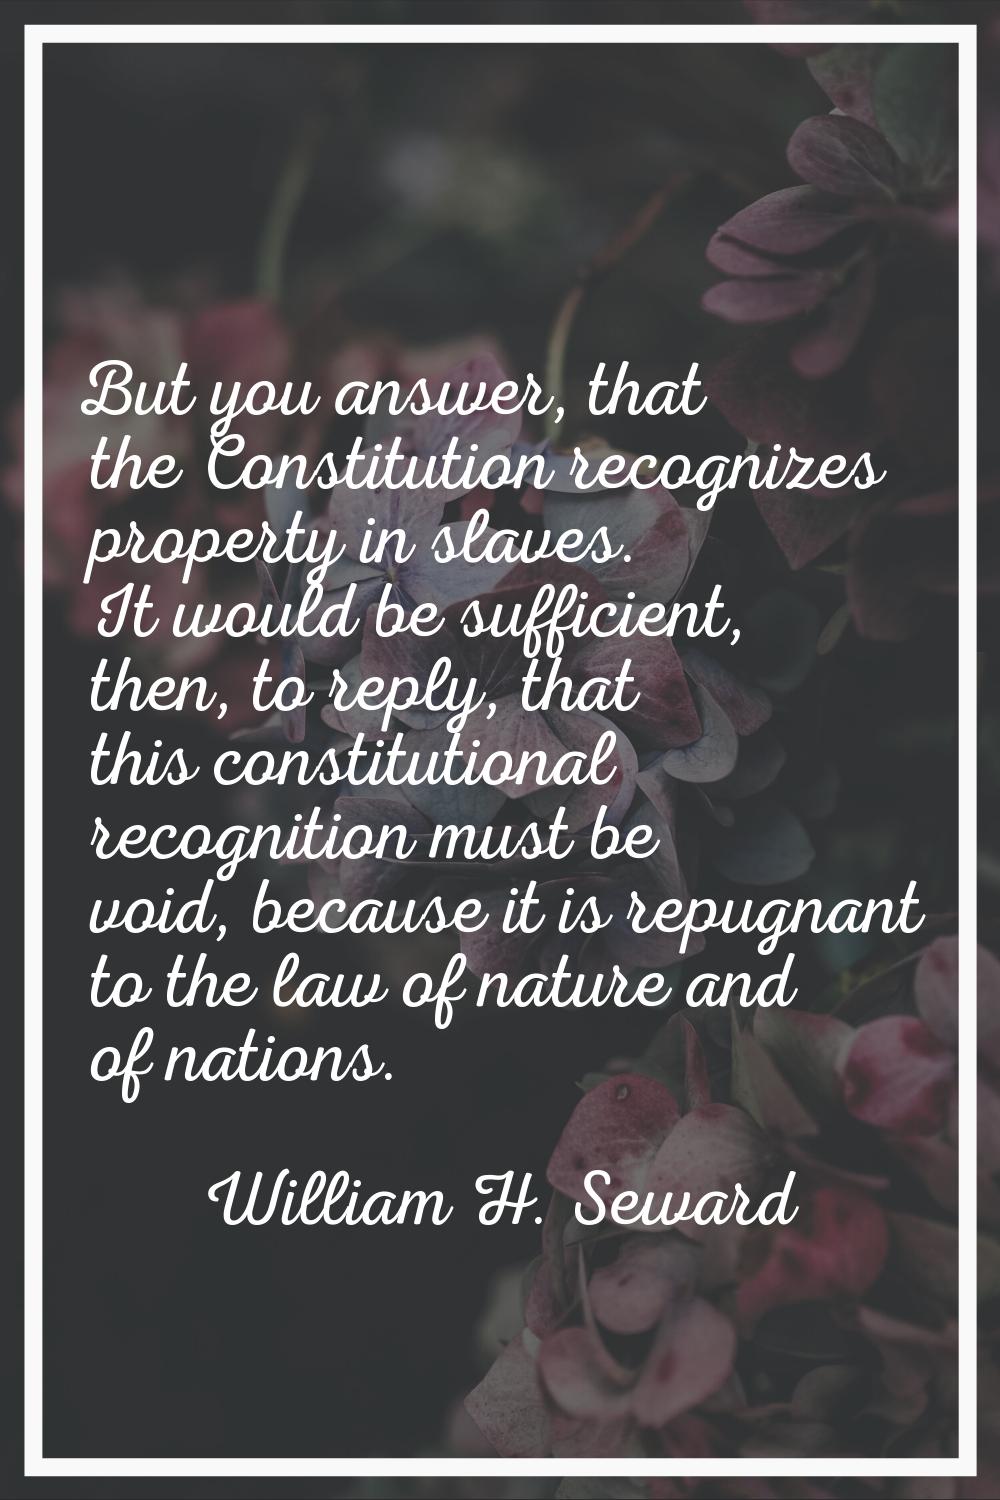 But you answer, that the Constitution recognizes property in slaves. It would be sufficient, then, 